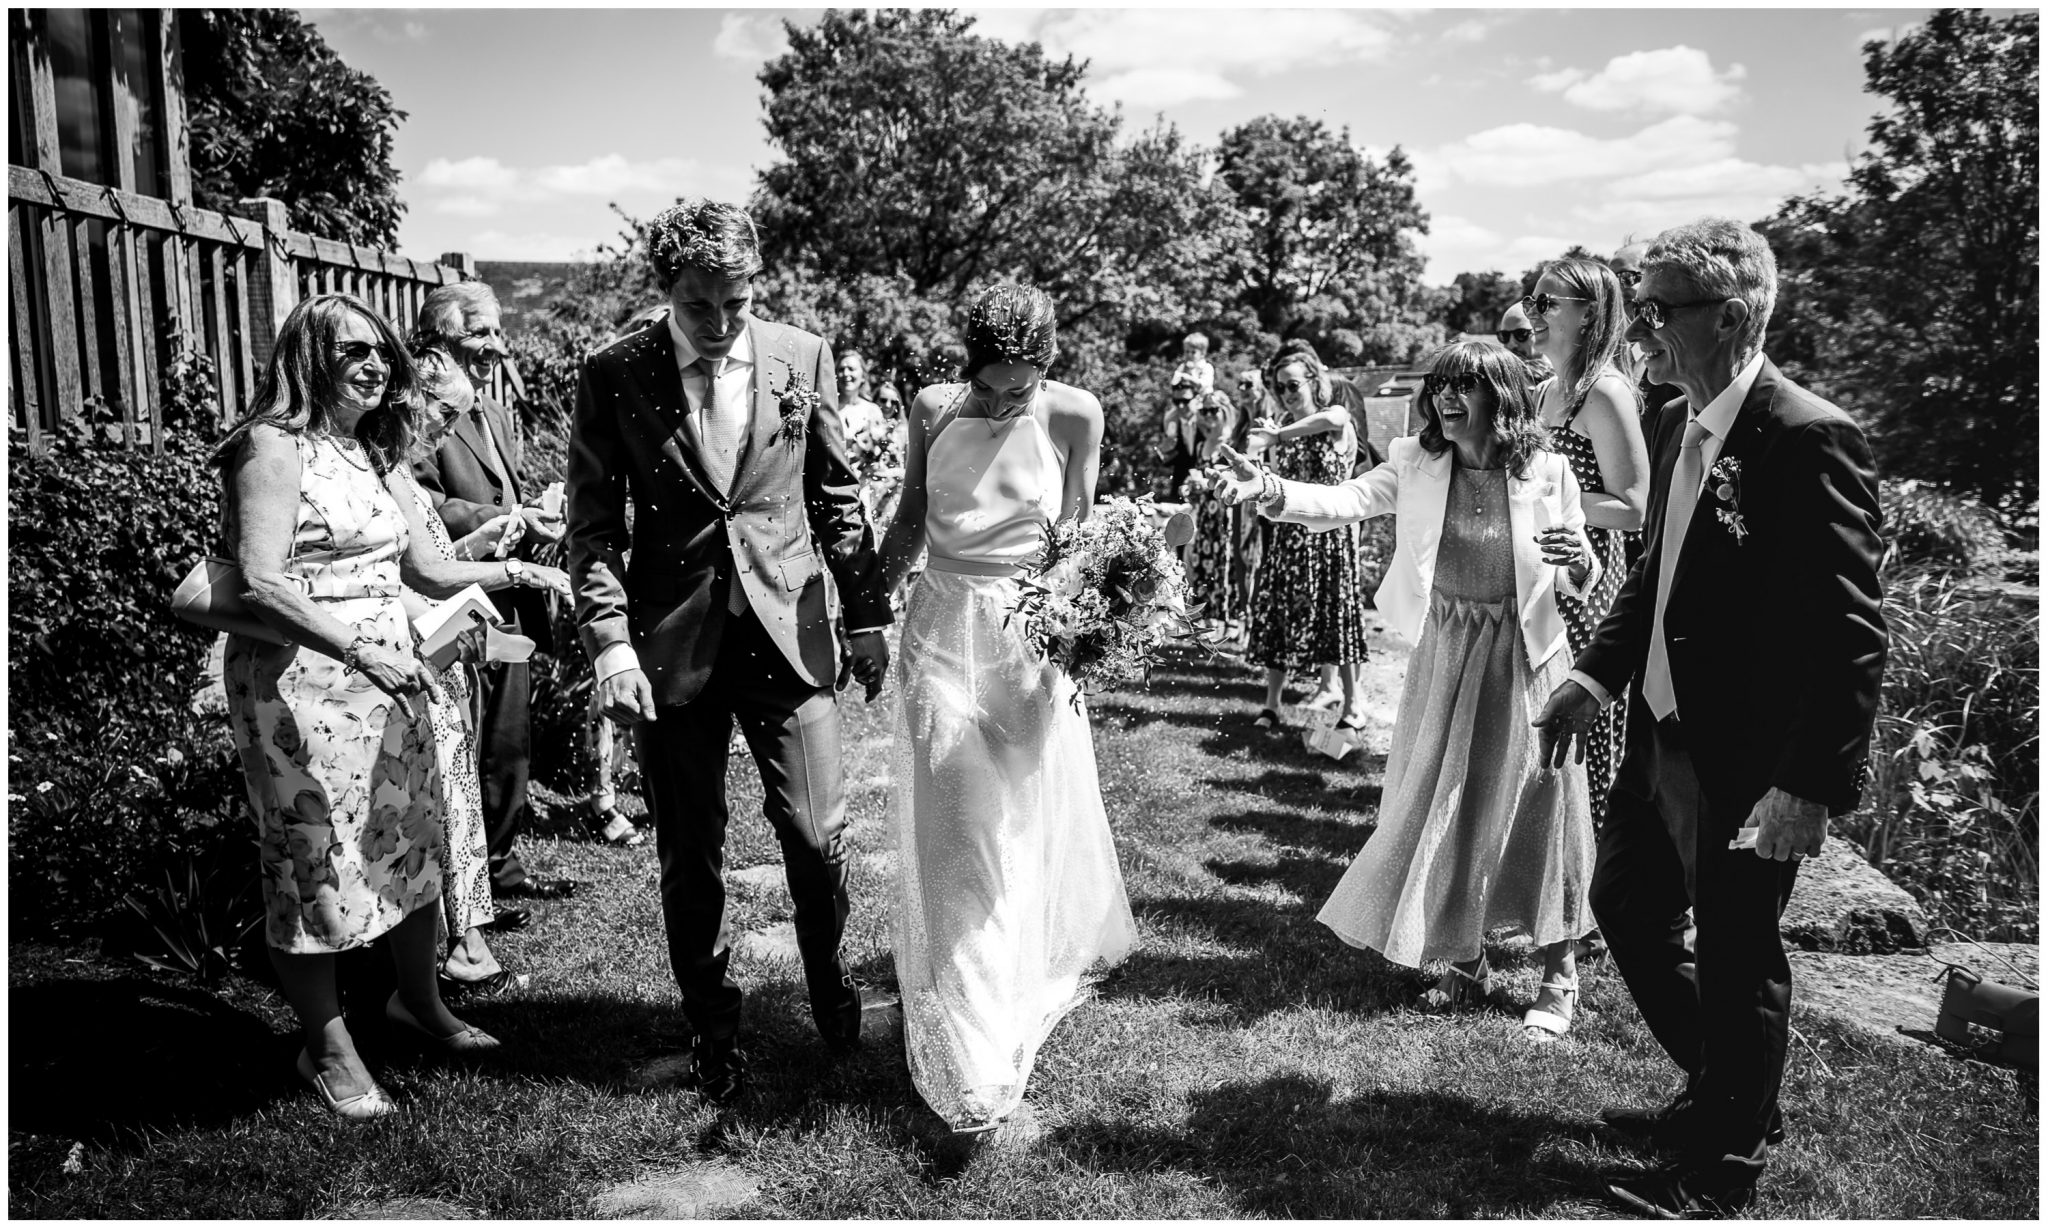 Guests throw confetti as the couple exit